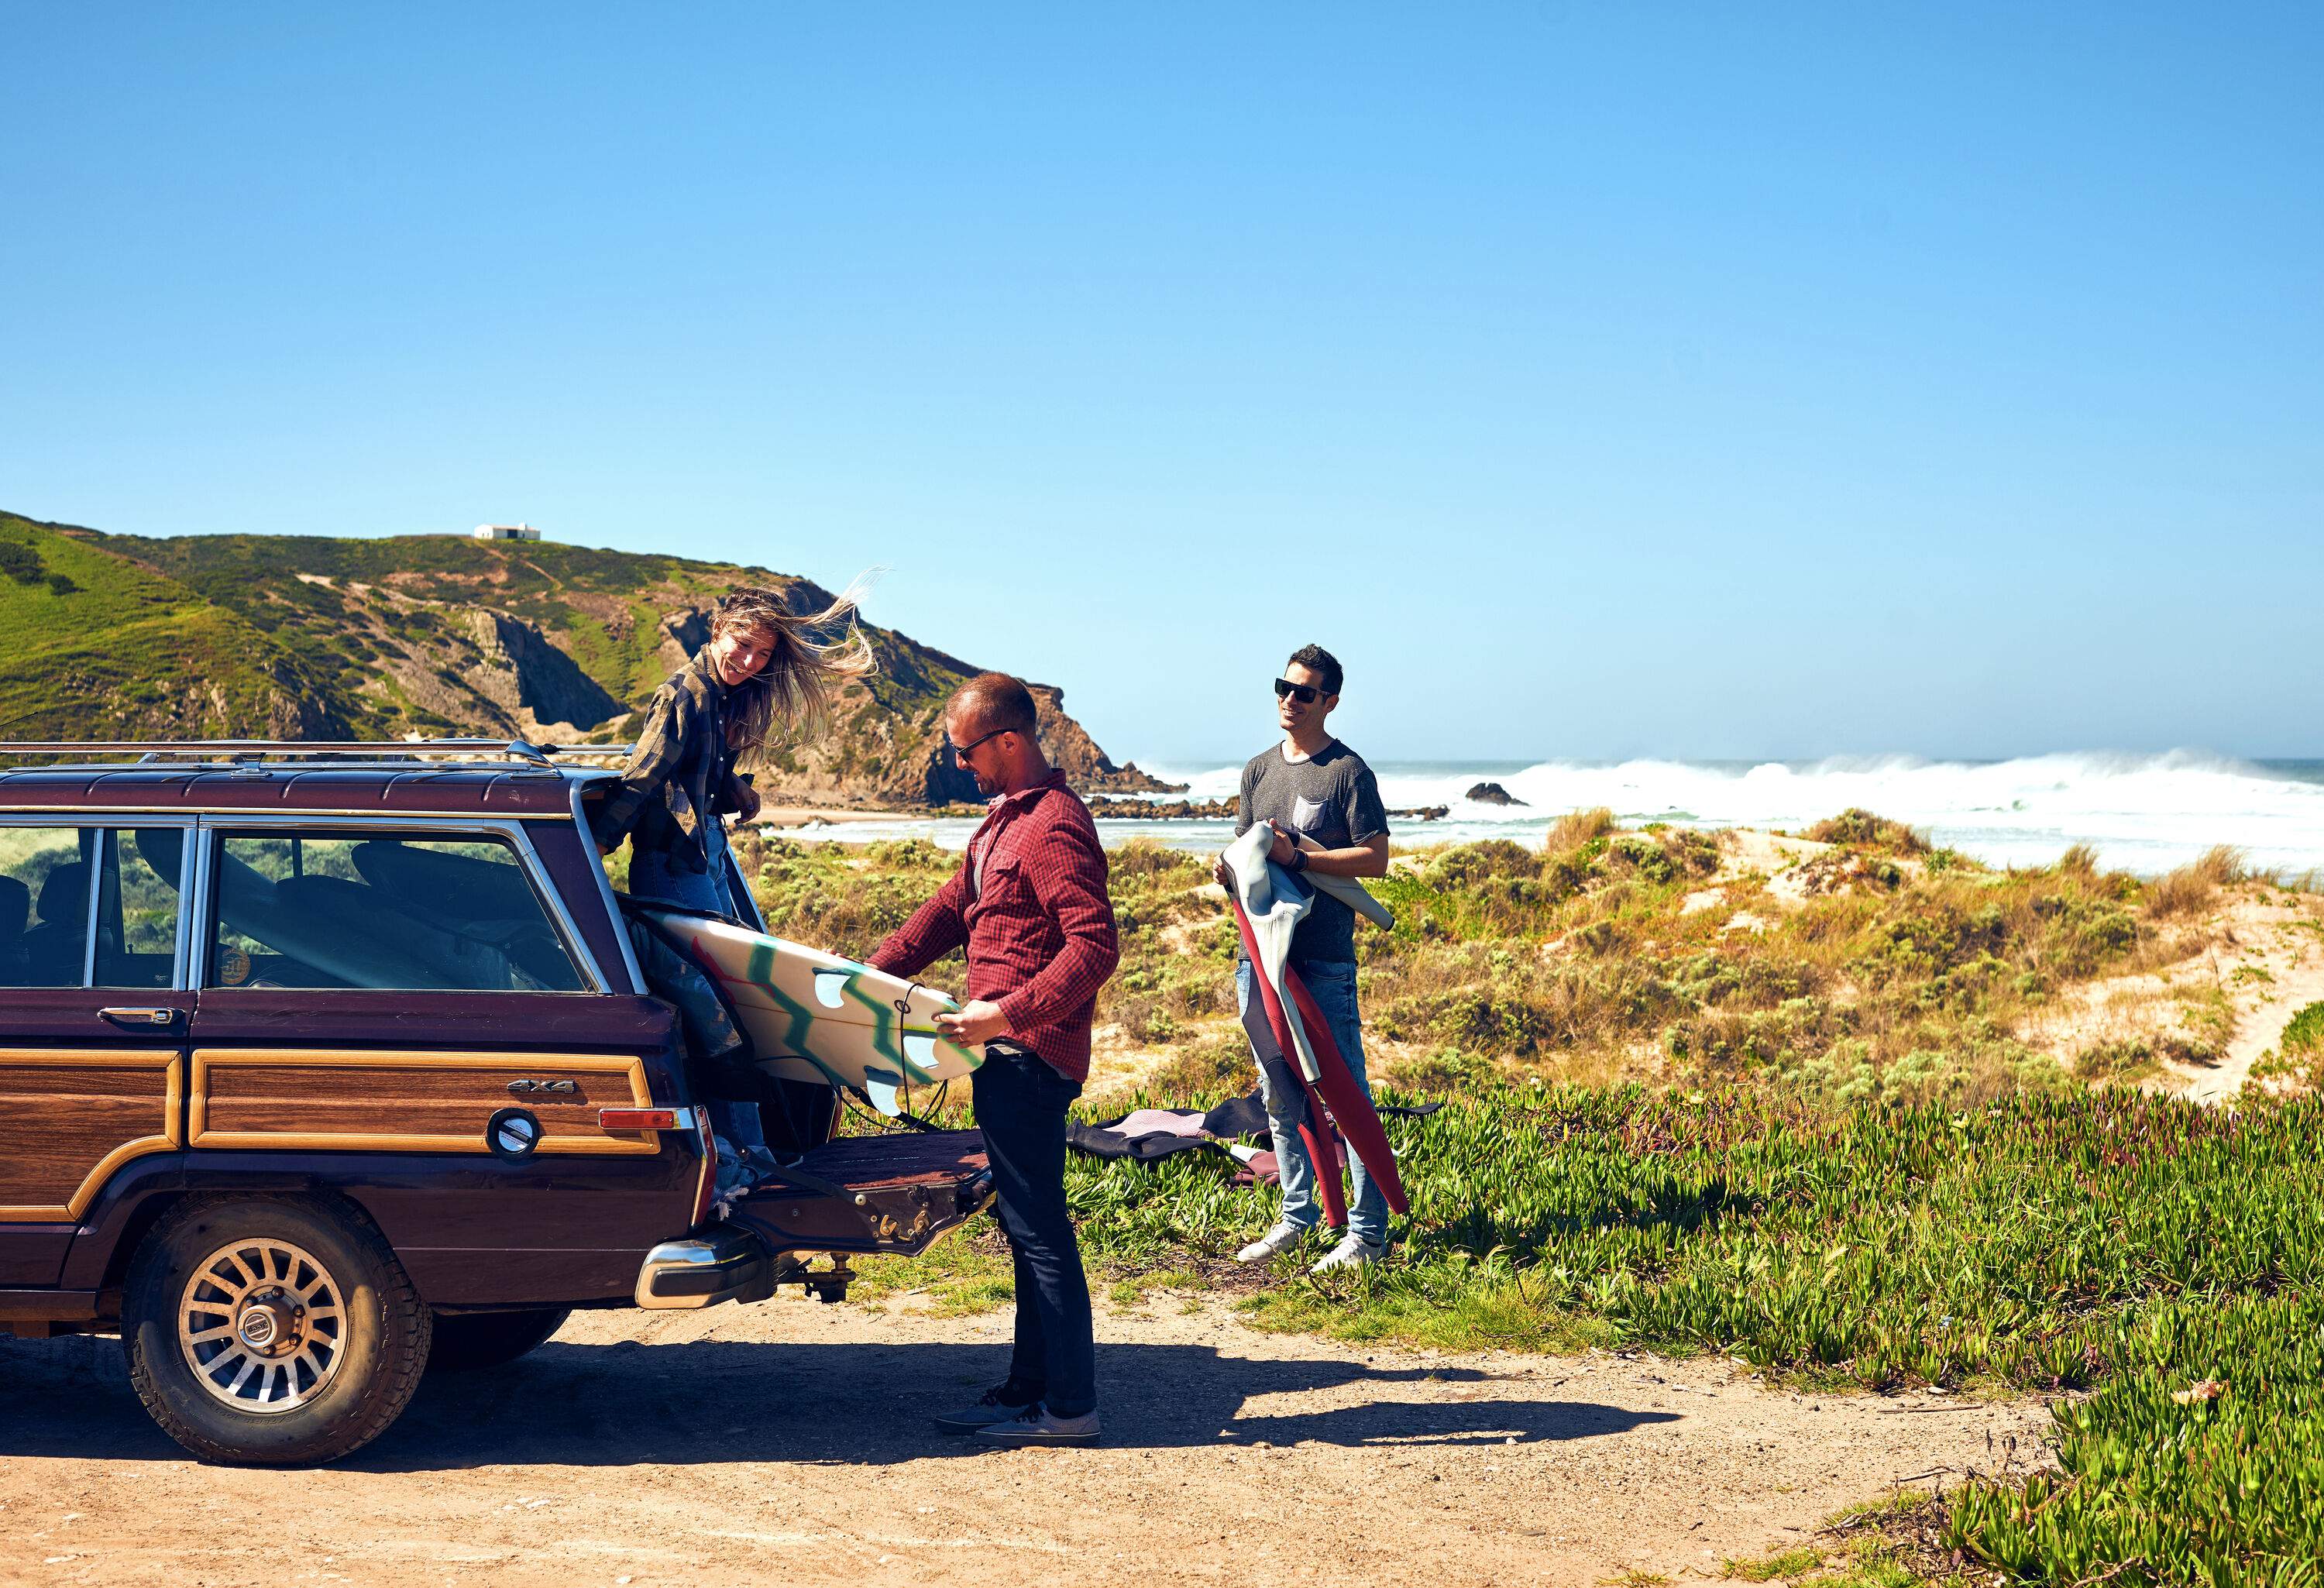 Three friends unloading their surfboards from a car's trunk in a grassy beach.